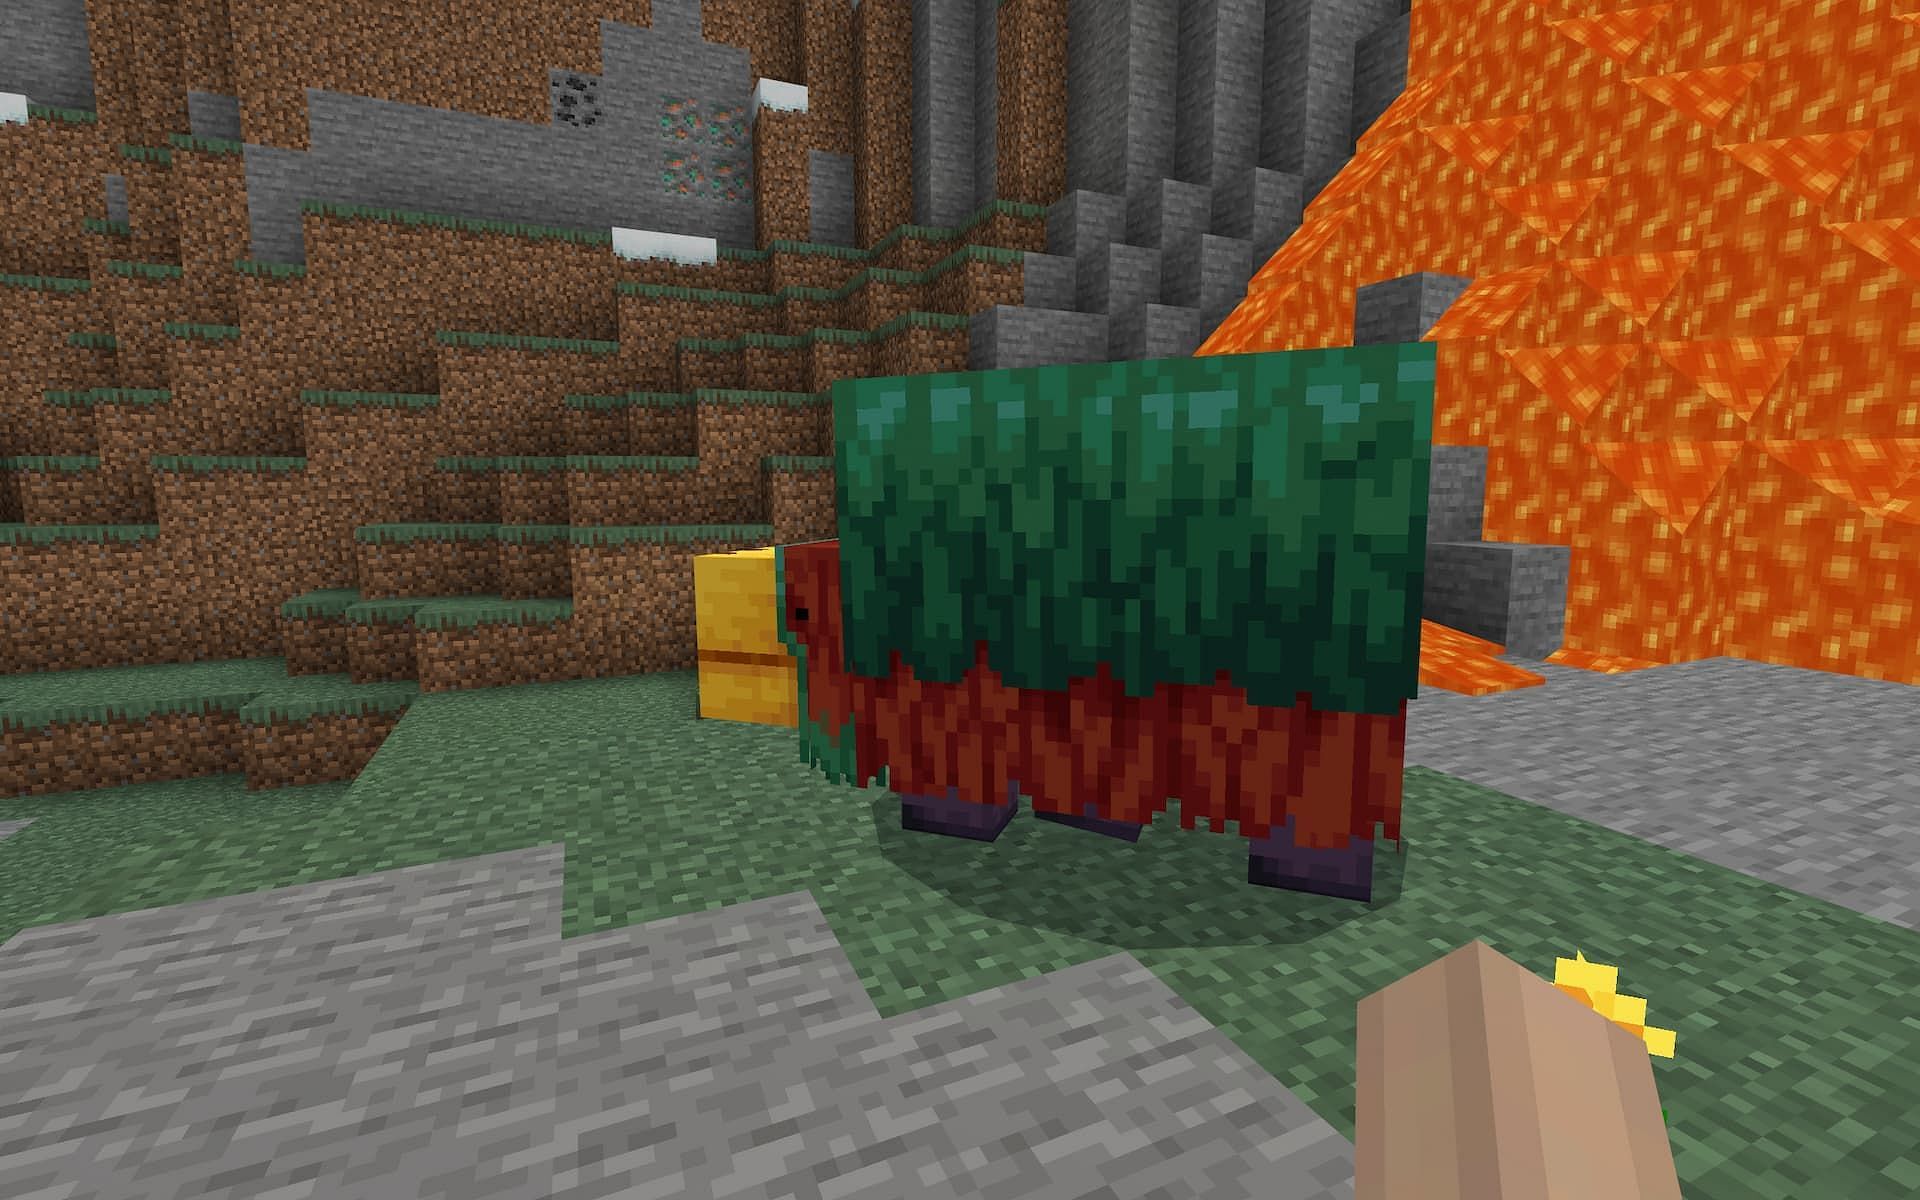 Players must first locate a sniffer to ride (Image via Mojang)